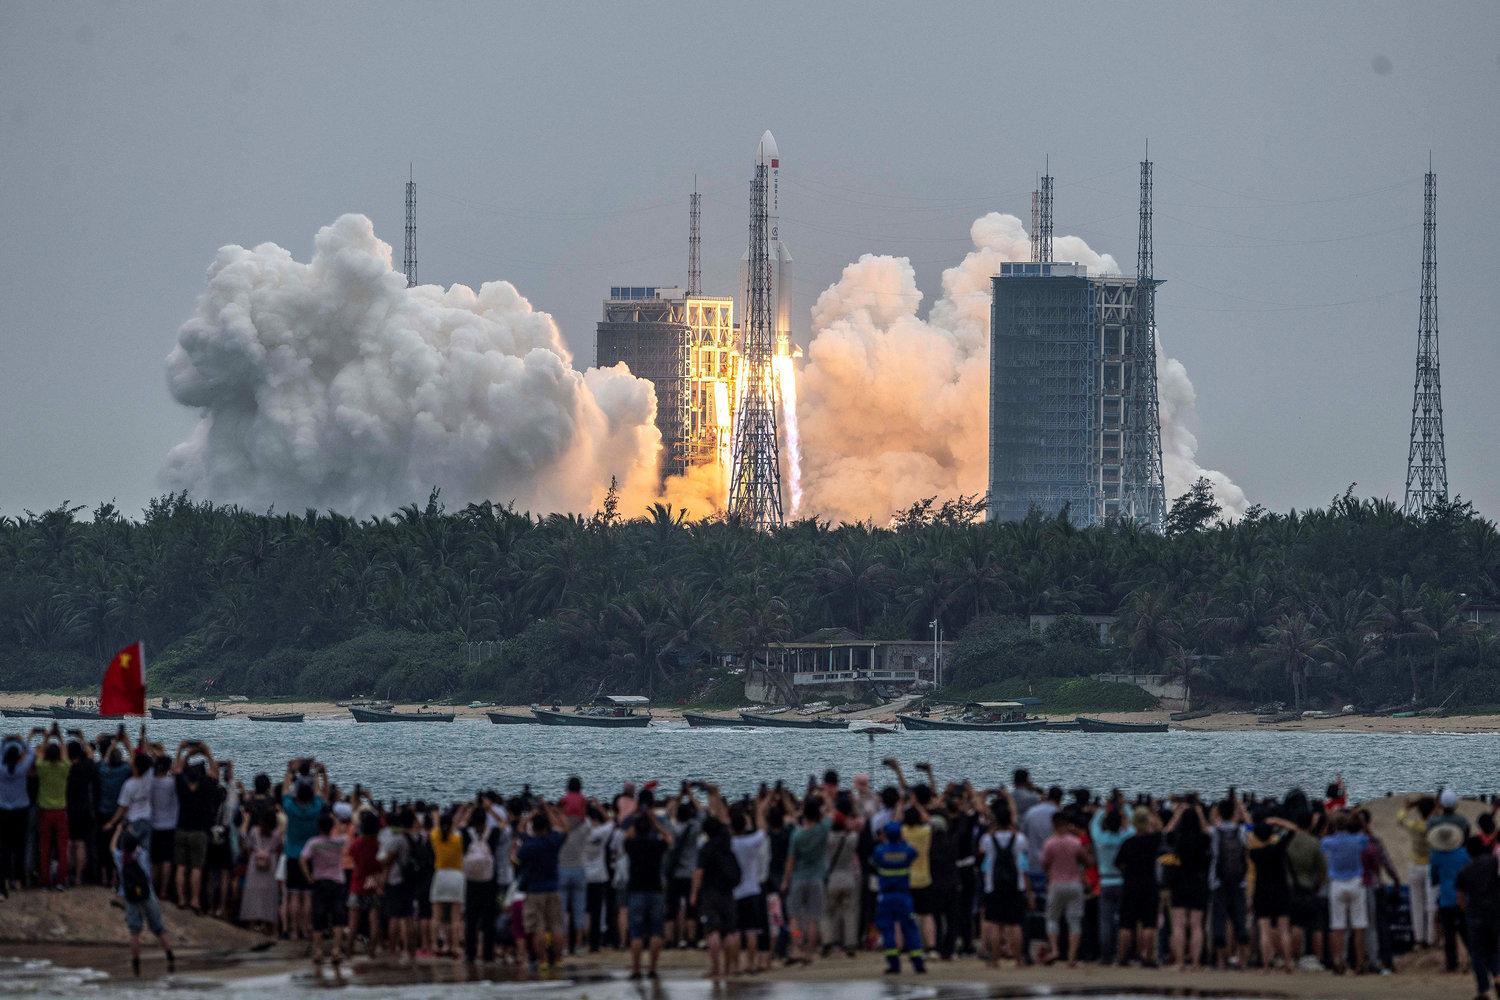 People watch a Long March 5B rocket, carrying China's Tianhe space station core module, as it lifts off from the Wenchang Space Launch Center in southern China's Hainan province on April 29, 2021. (STR/AFP/Getty Images/TNS)